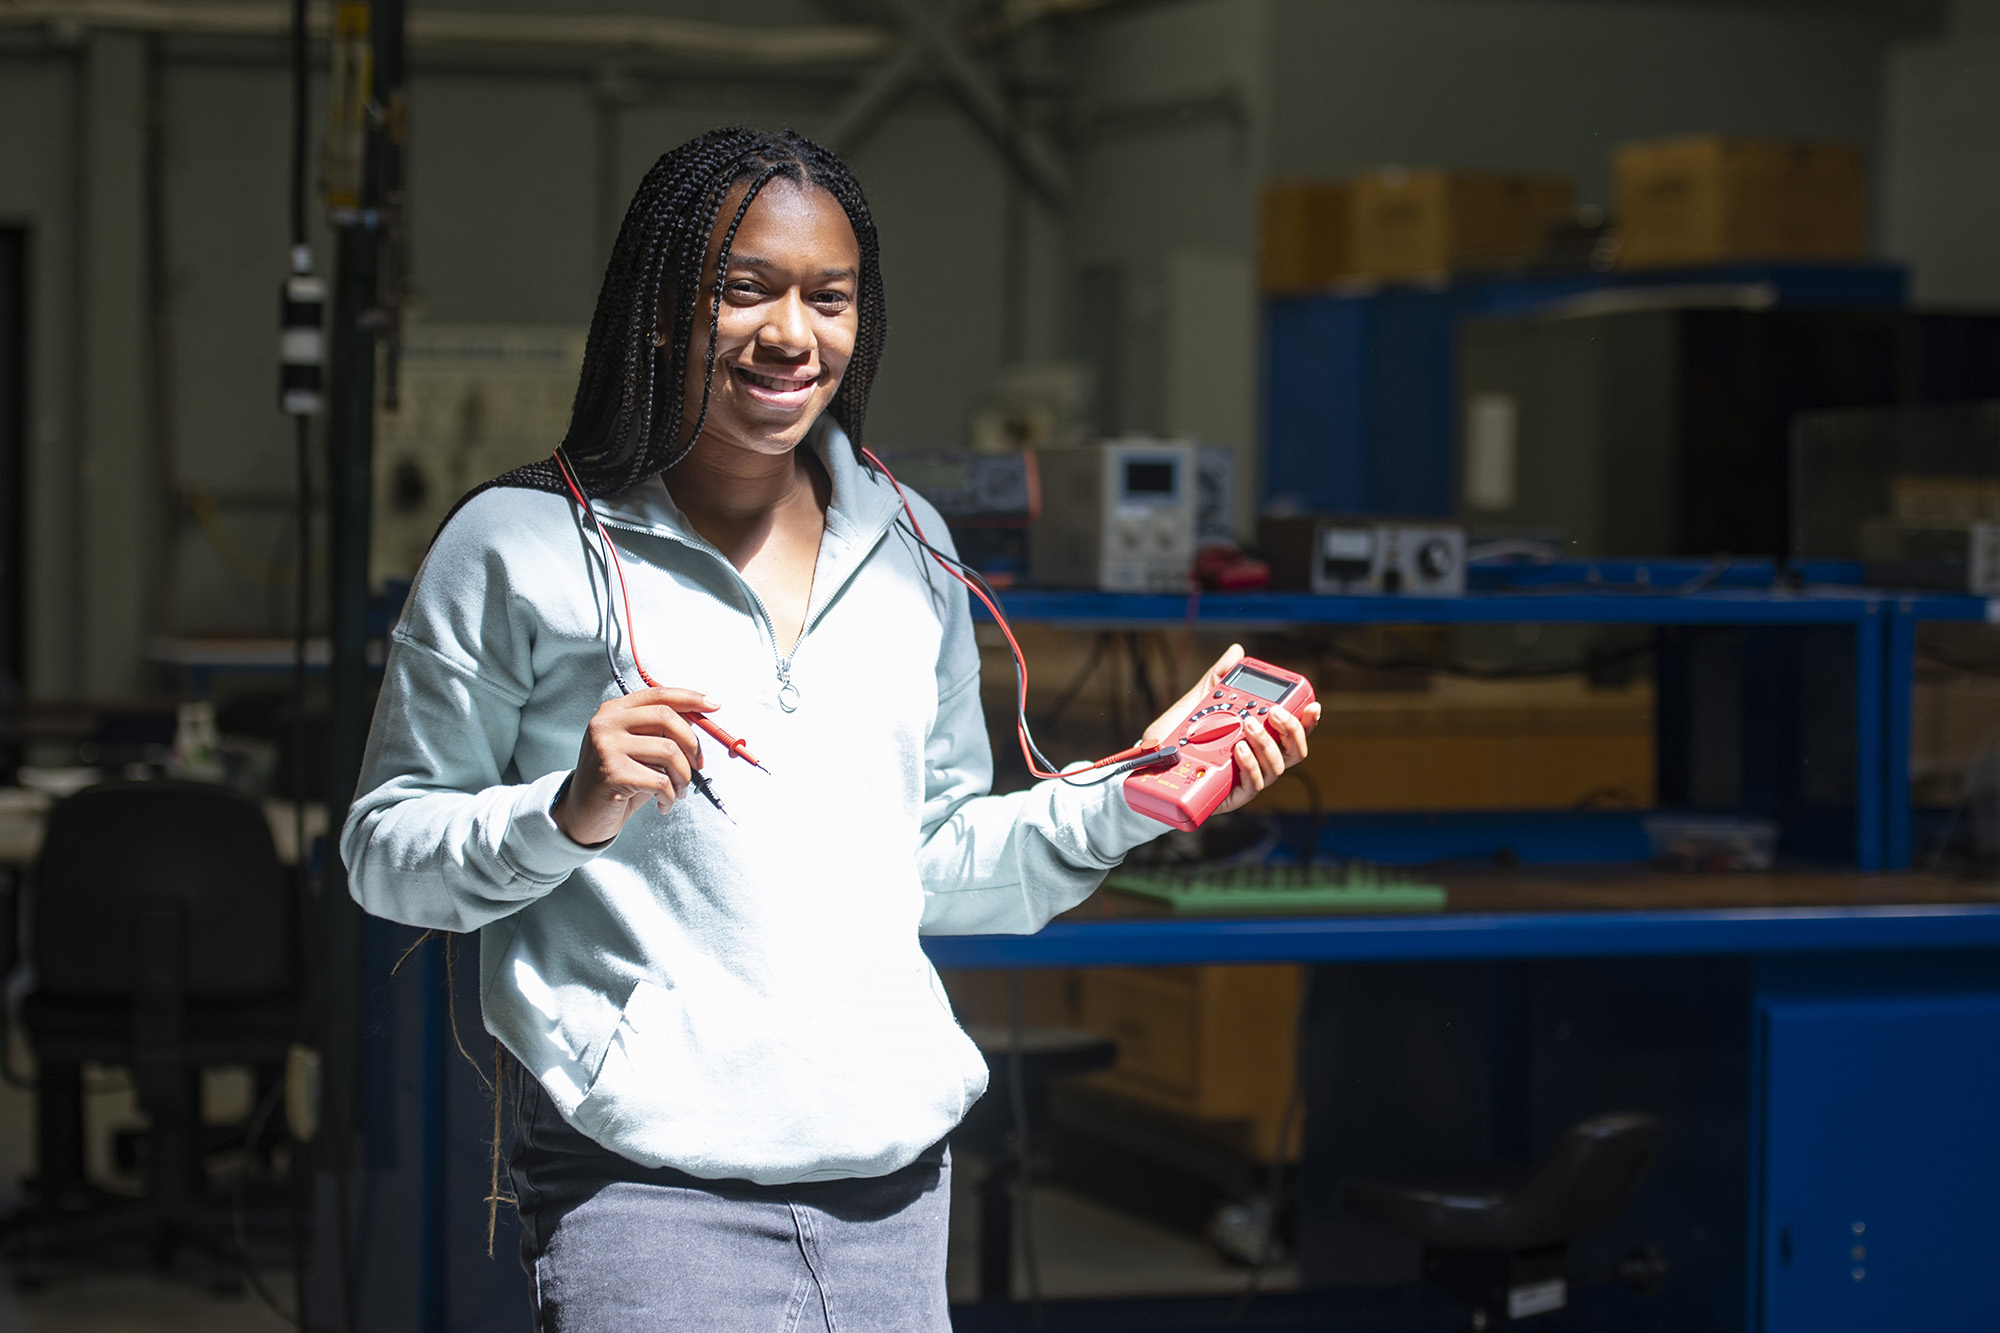 Student Zaire Gilbert holds an electrical meter tool in the College's Electricity and Electronics Lab.